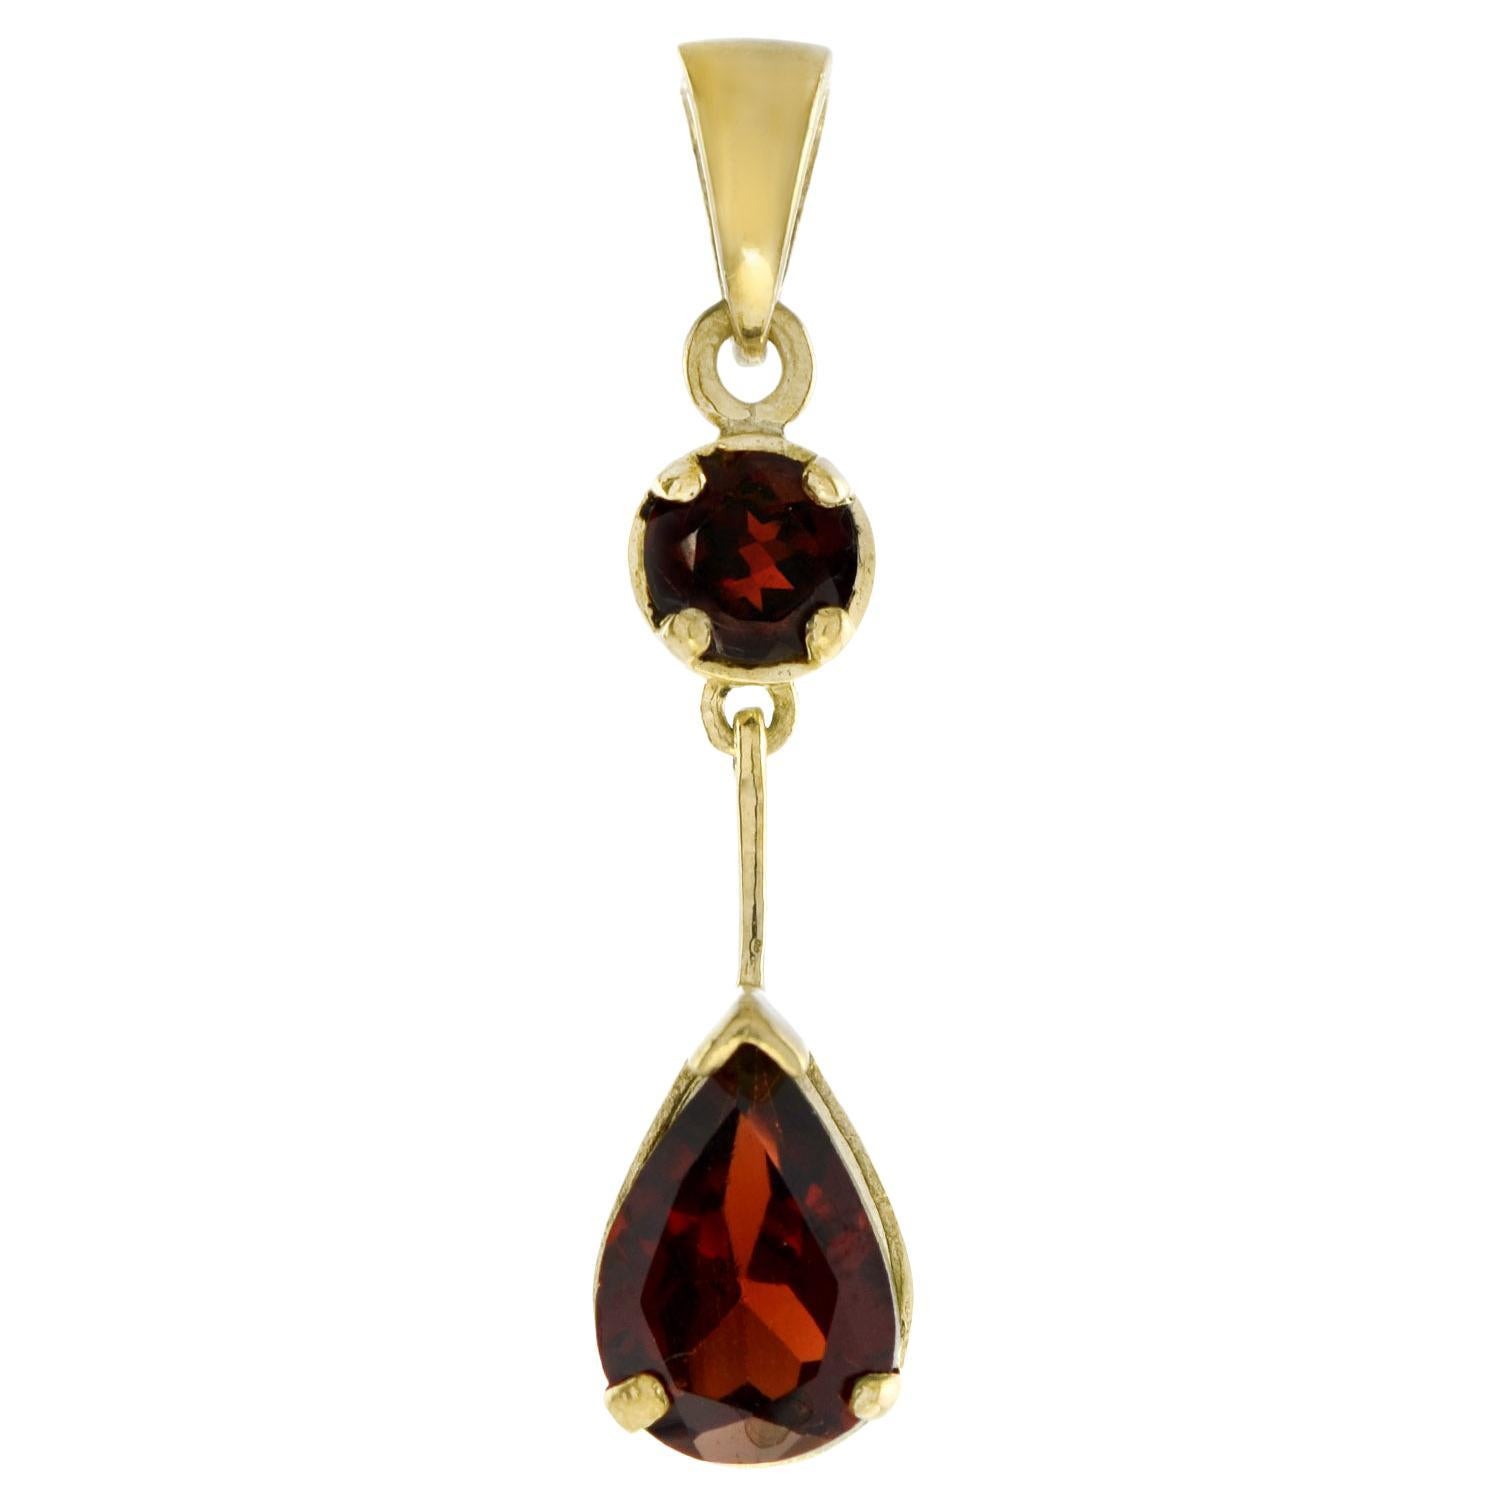 Vintage Style Pear Shaped Garnet Pendant in 14K Yellow Gold